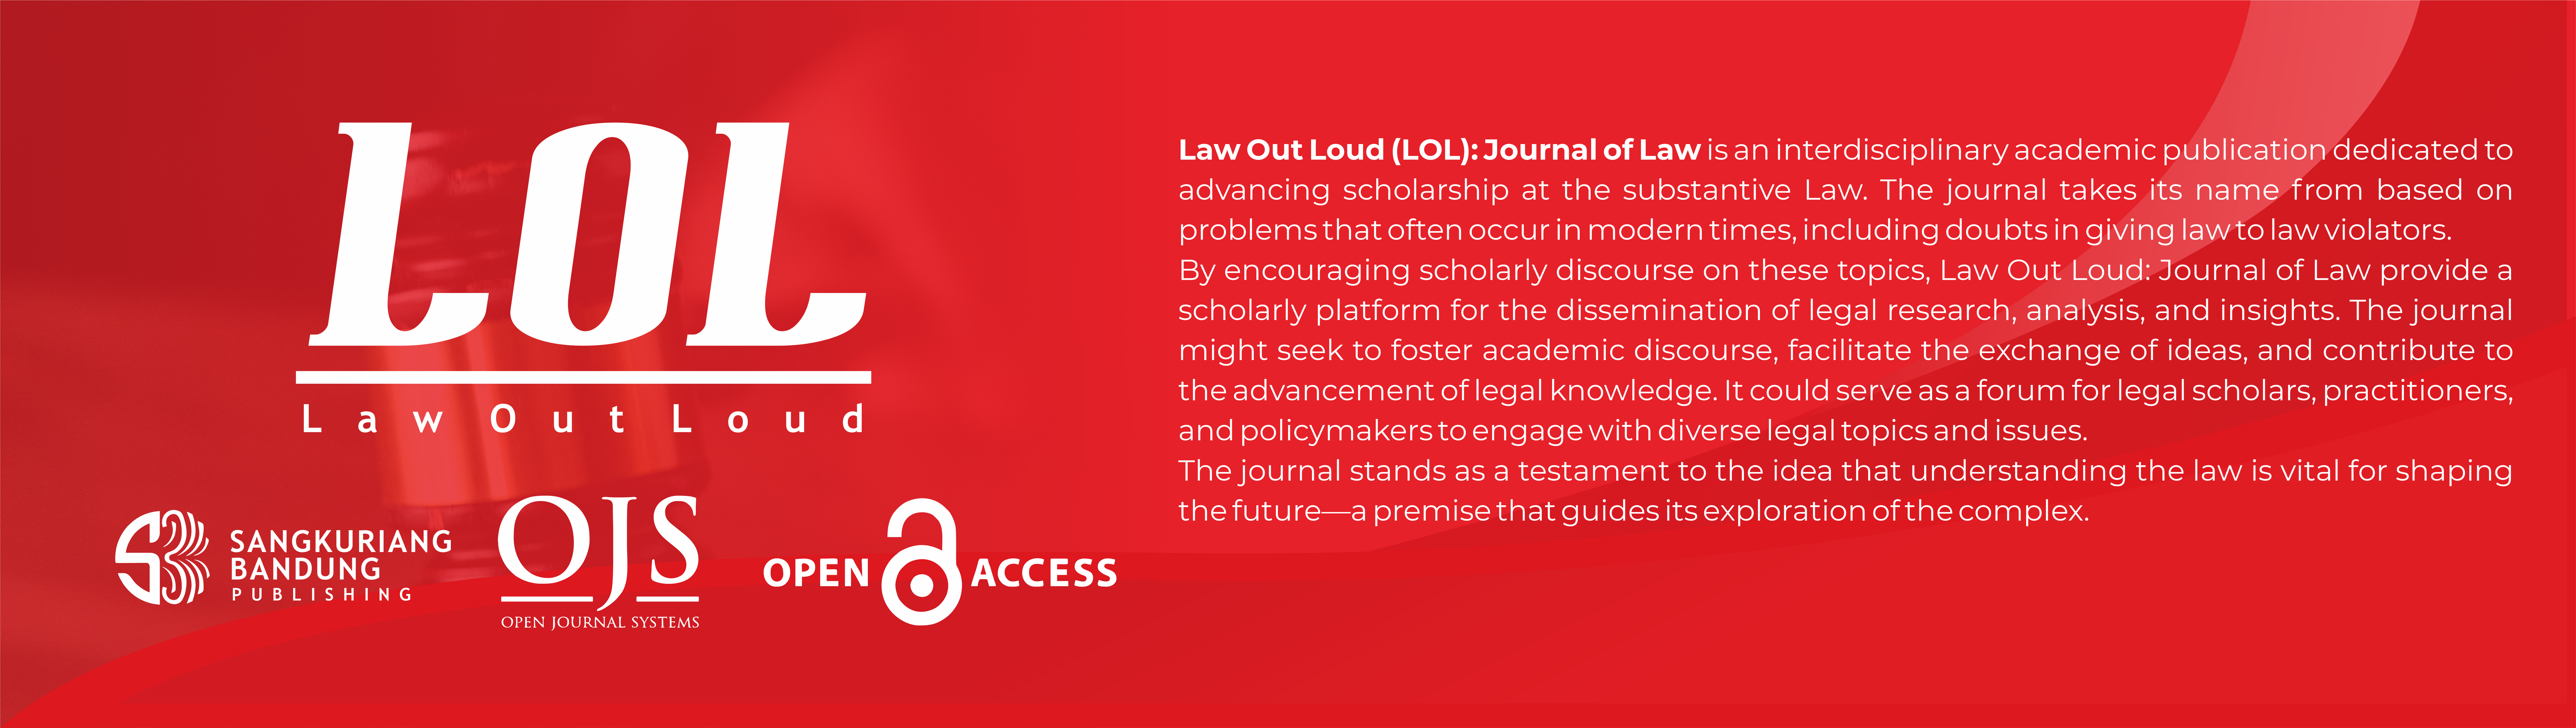 Law Out Loud (LOL): Journal of Law 